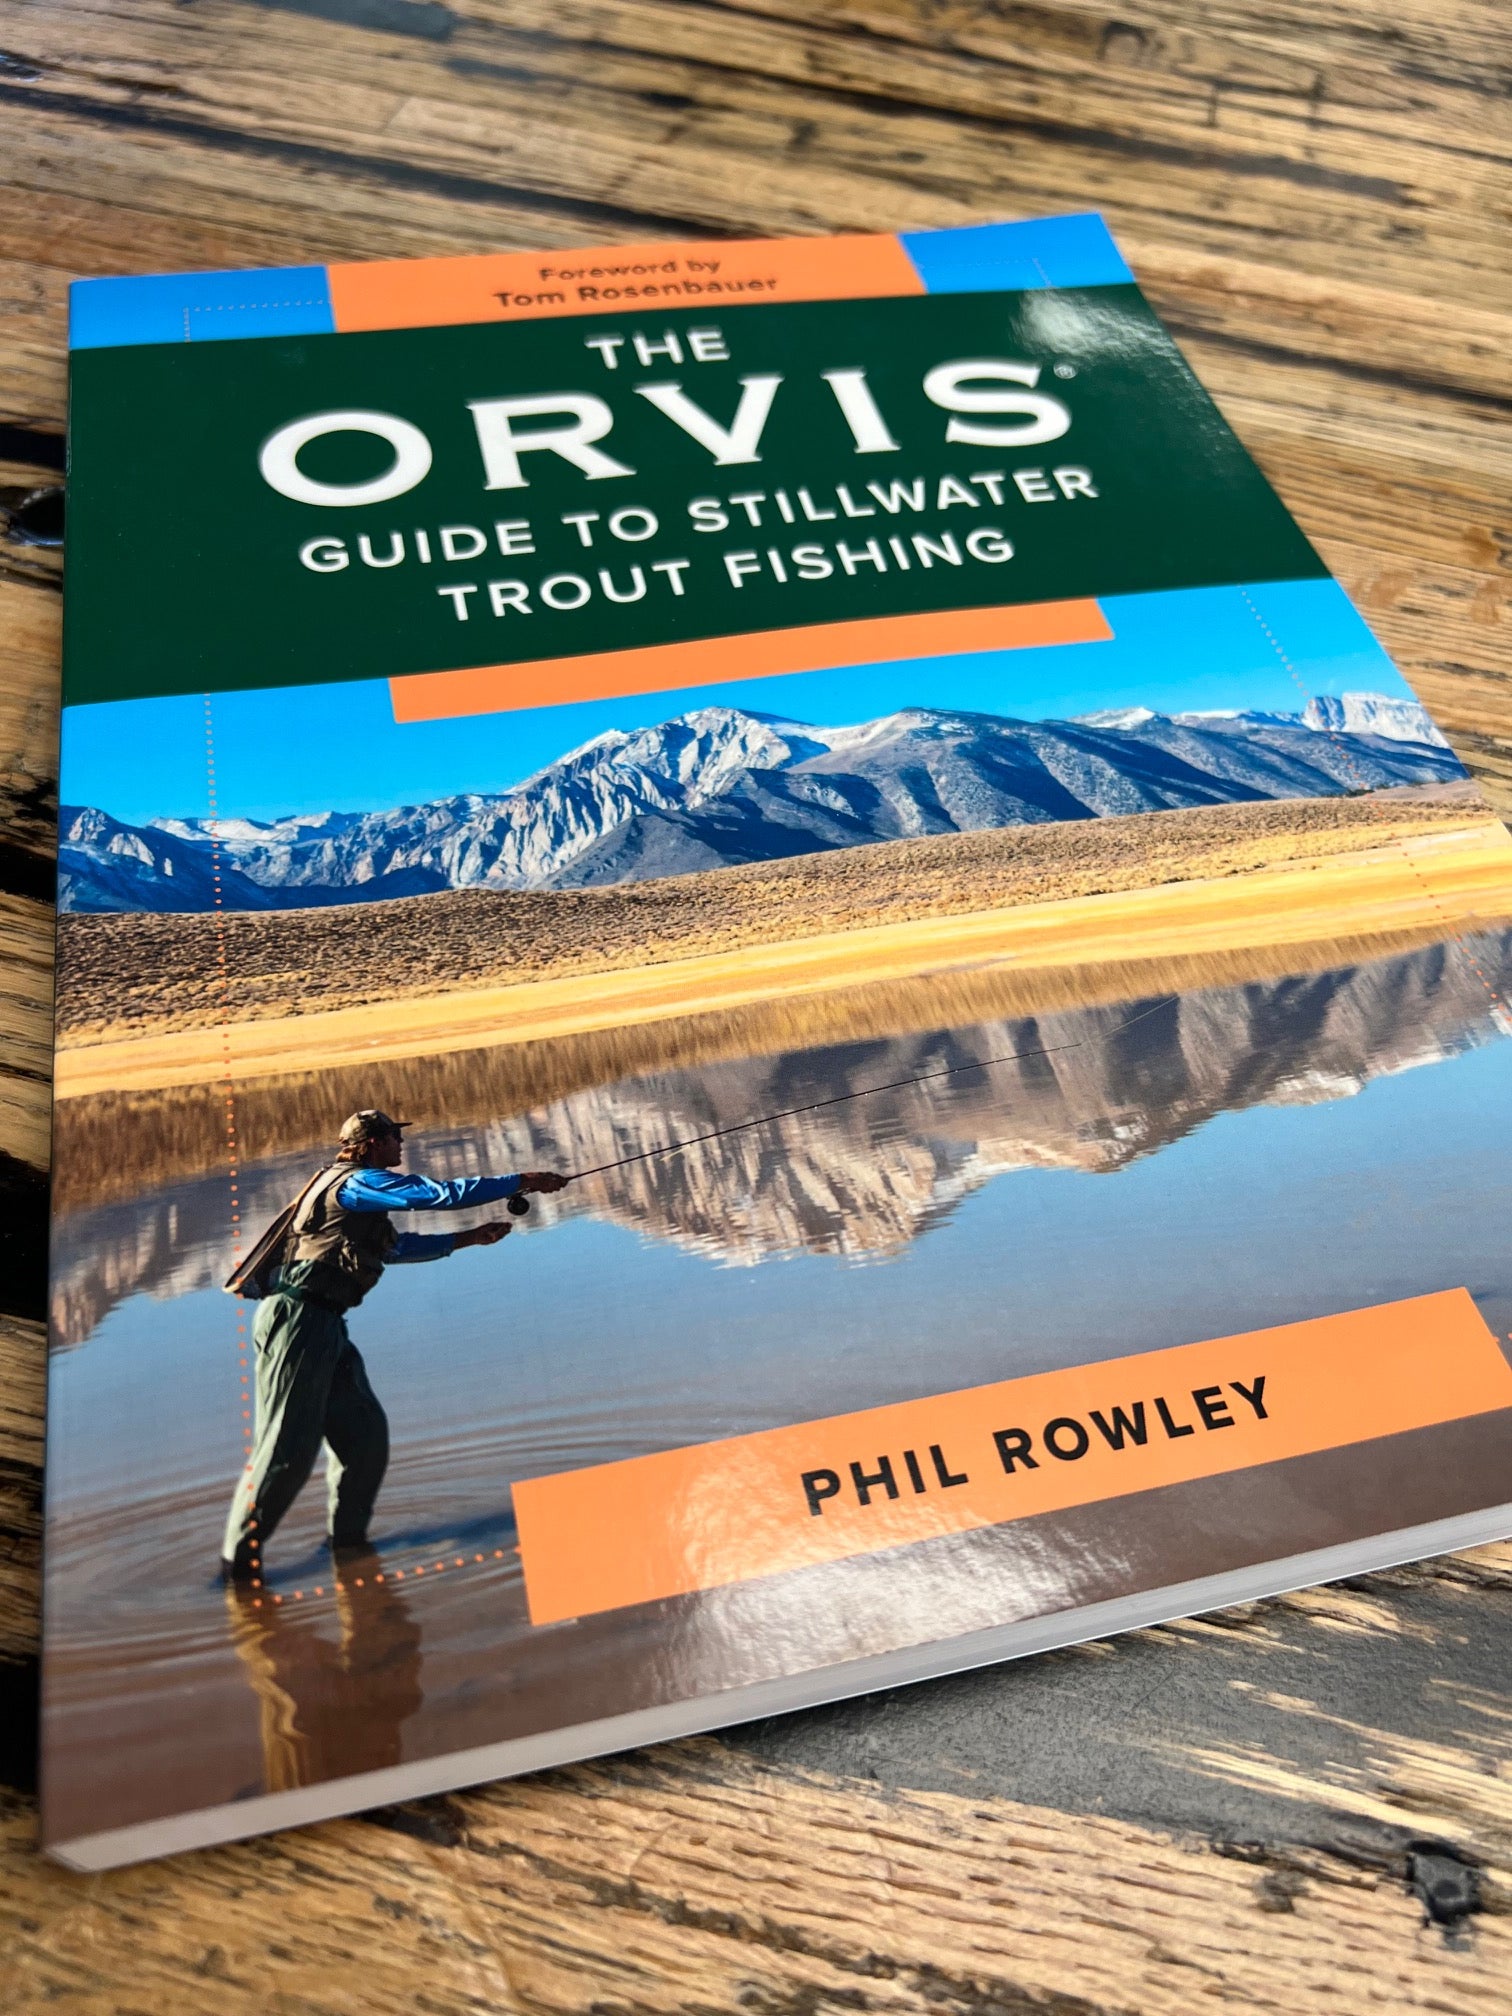 The Orvis Guide to Stillwater Trout Fishing, by Phil Rowley – charliesflybox